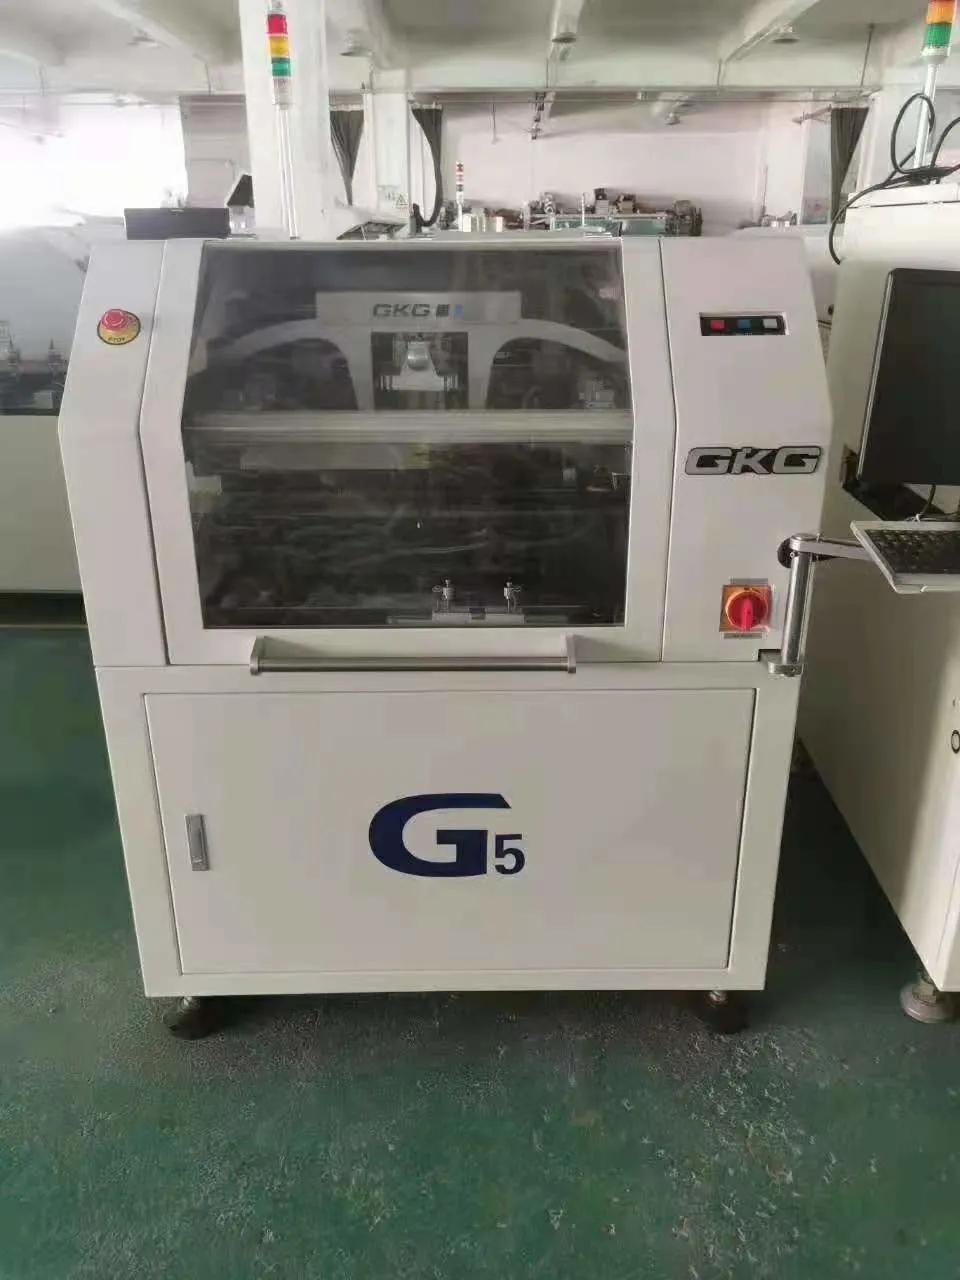 Gkg G5 Fully Automatic SMT Stencil Printer for SMT Assembly Line / High Precise Printing Machine